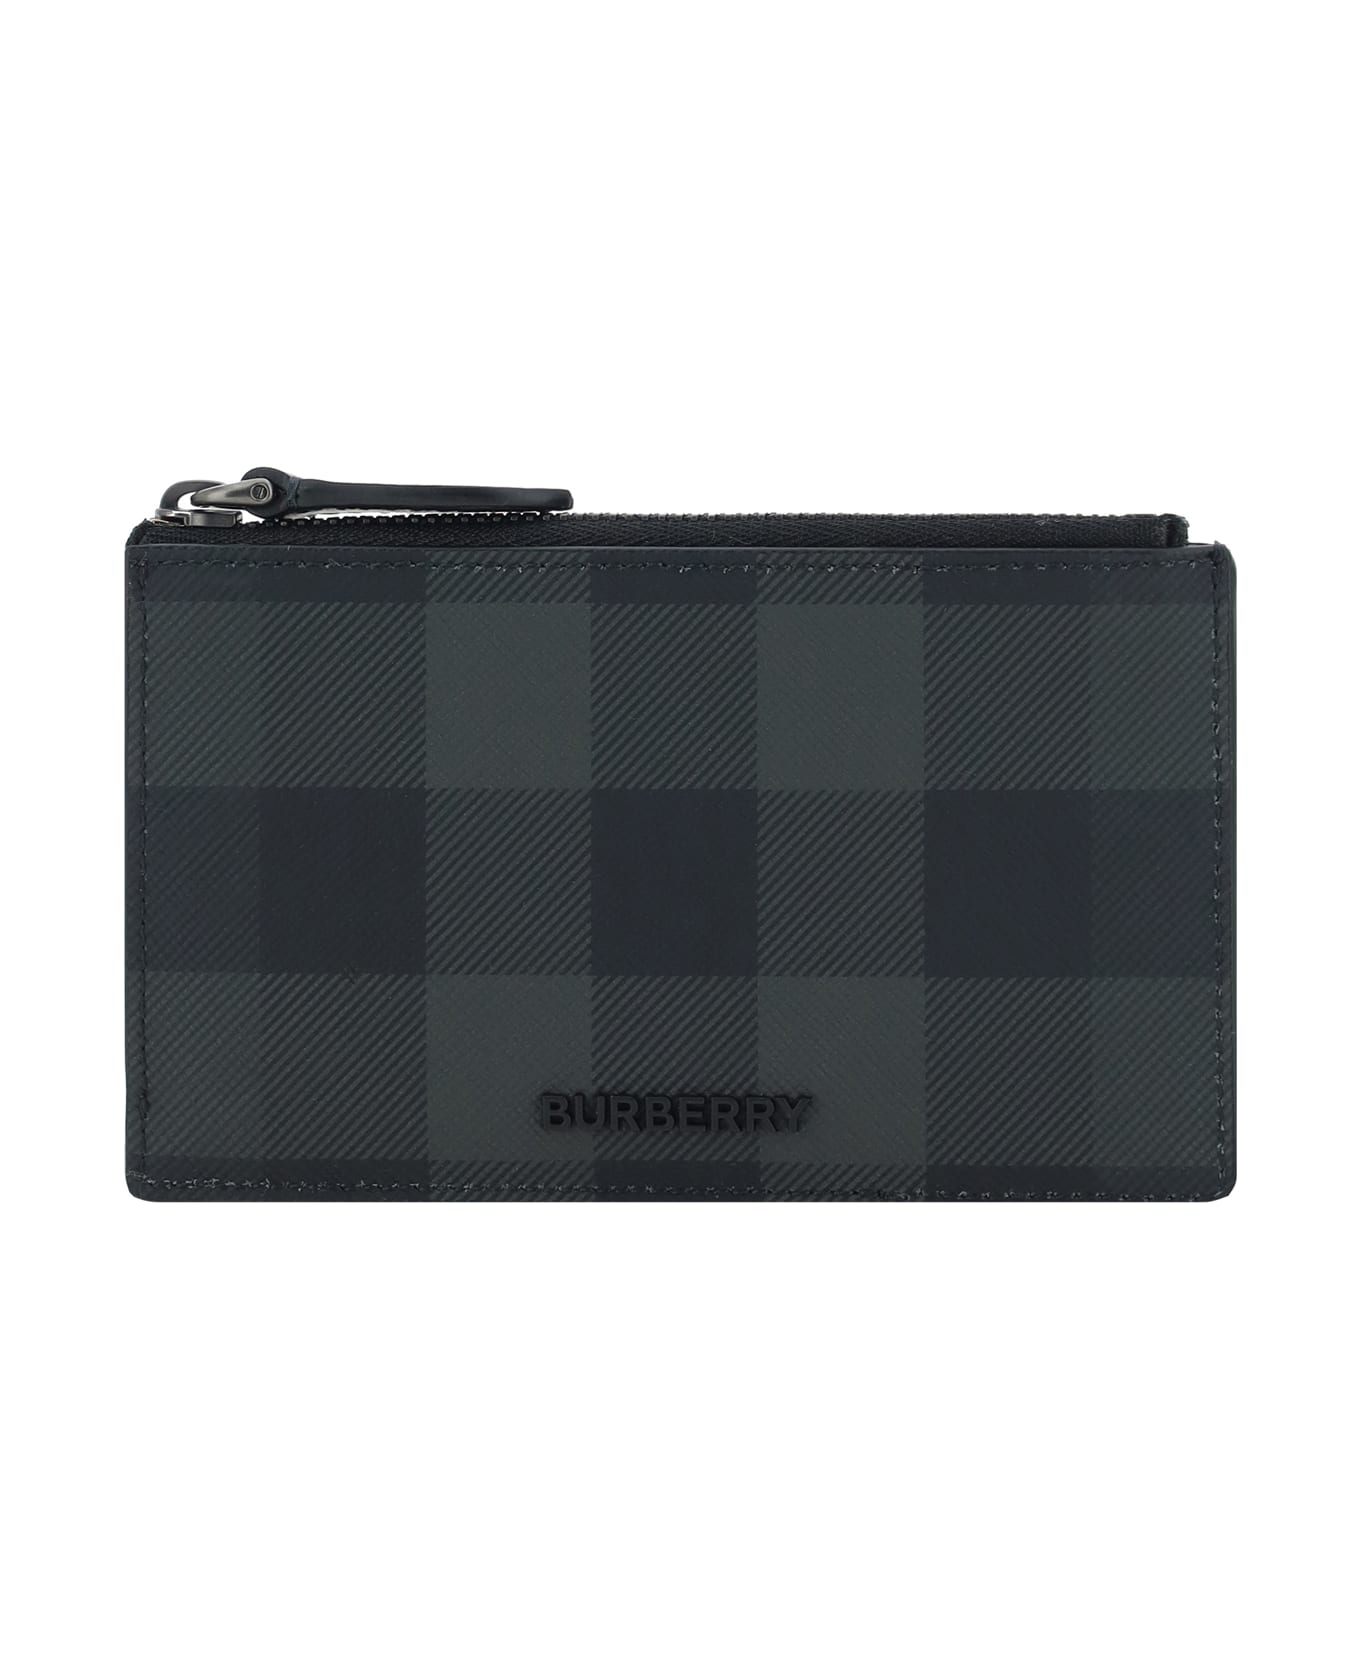 Burberry Coin Purse - Charcoal 財布